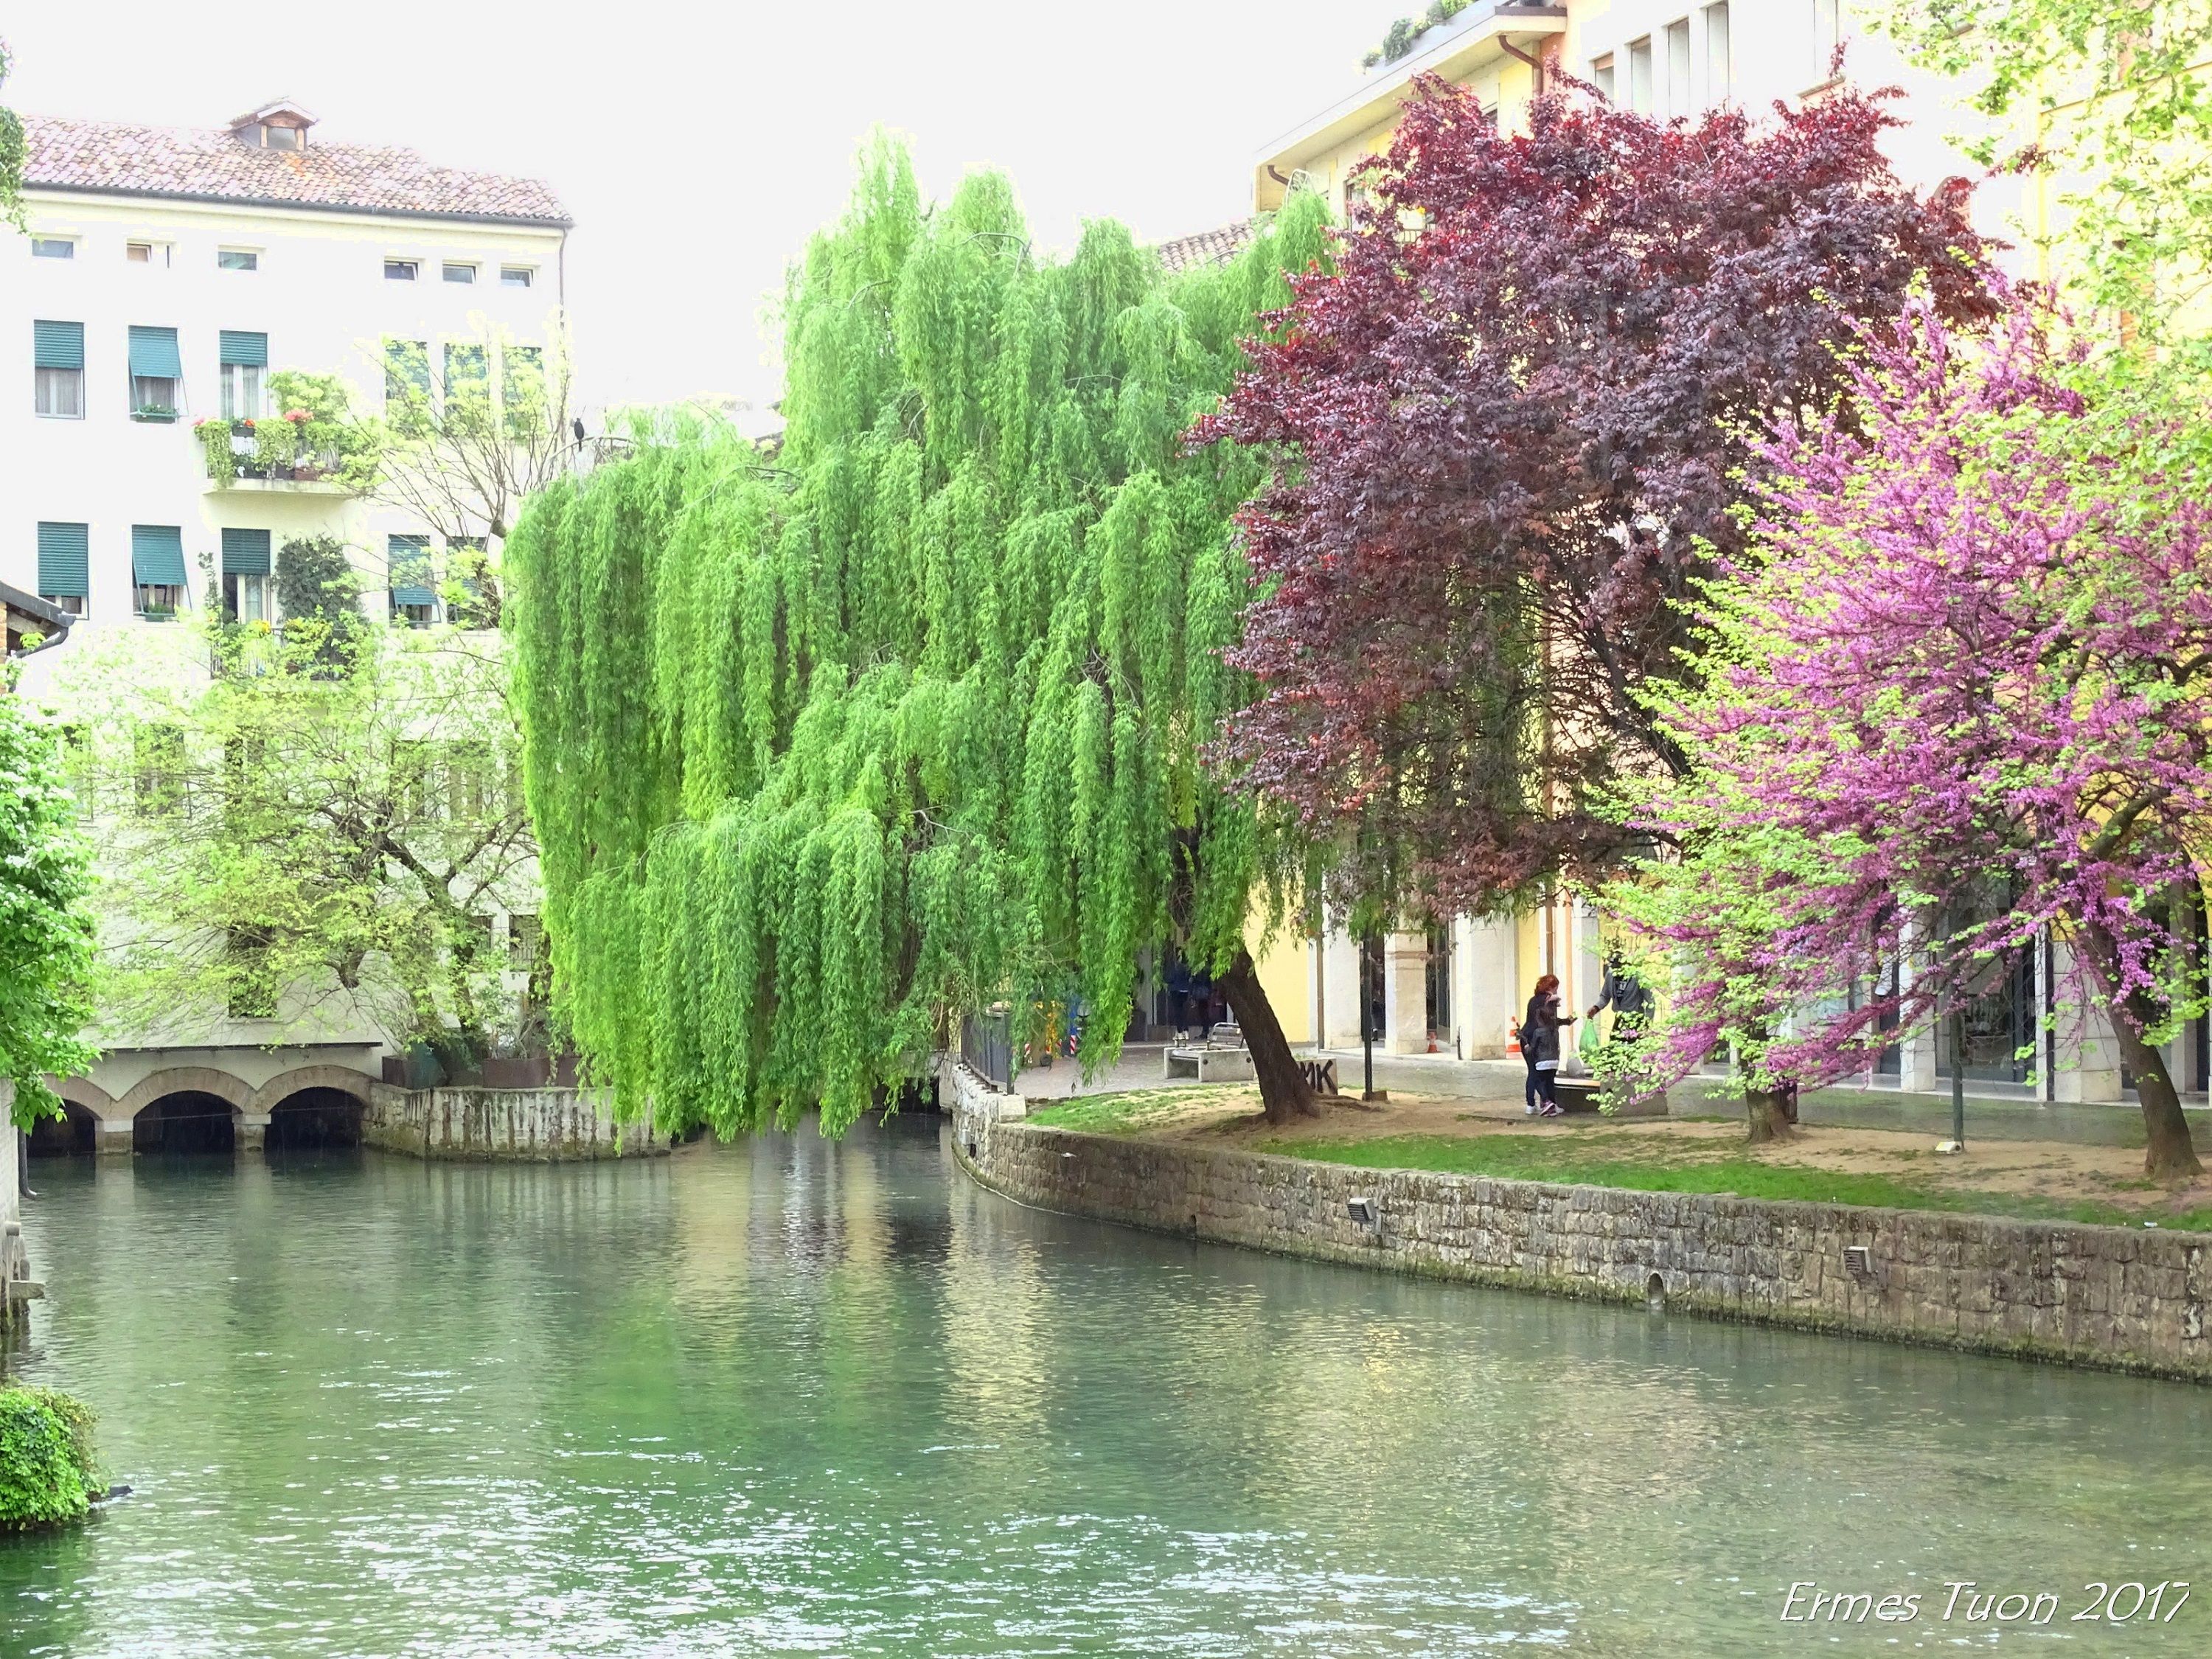 Caption: a clean river crossing the city center, with green and blossoming trees - Local Guide @ermest